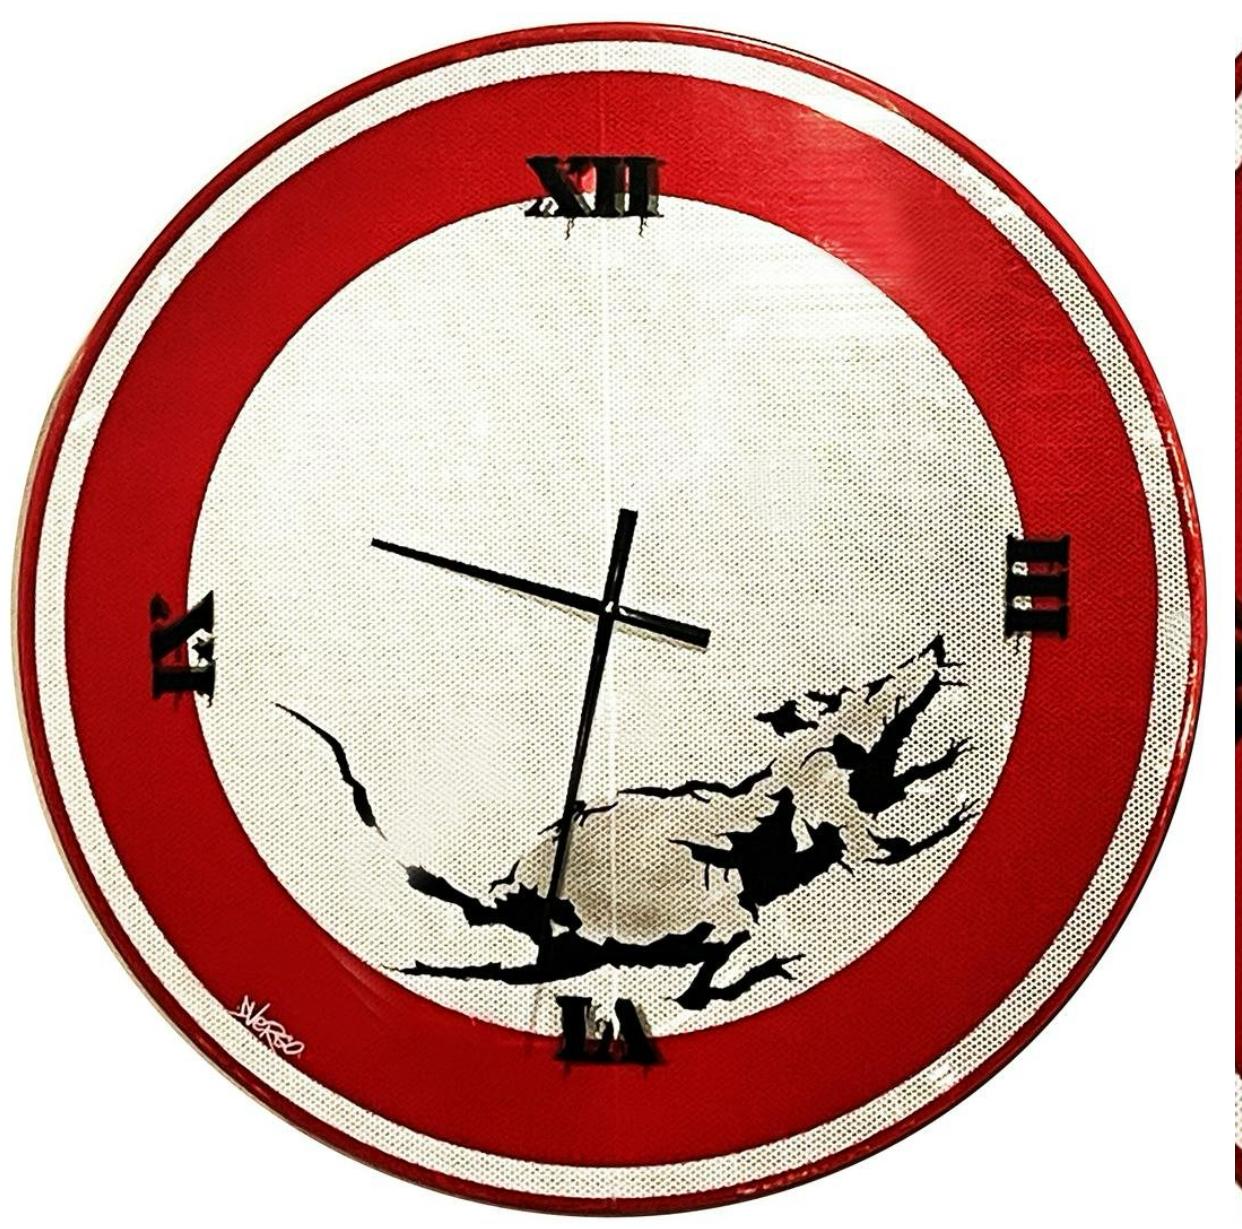 'Tic-Toc Clock'by Dverso, 2020
Inspired by the celebrated artwork of Banksy.
31.5 x 31.5 Inches
Hand-painted (no stencil) acrylic on real repurposed Dutch traffic sign with integrated working clock.
Direct from the artists studio.
Original artwork